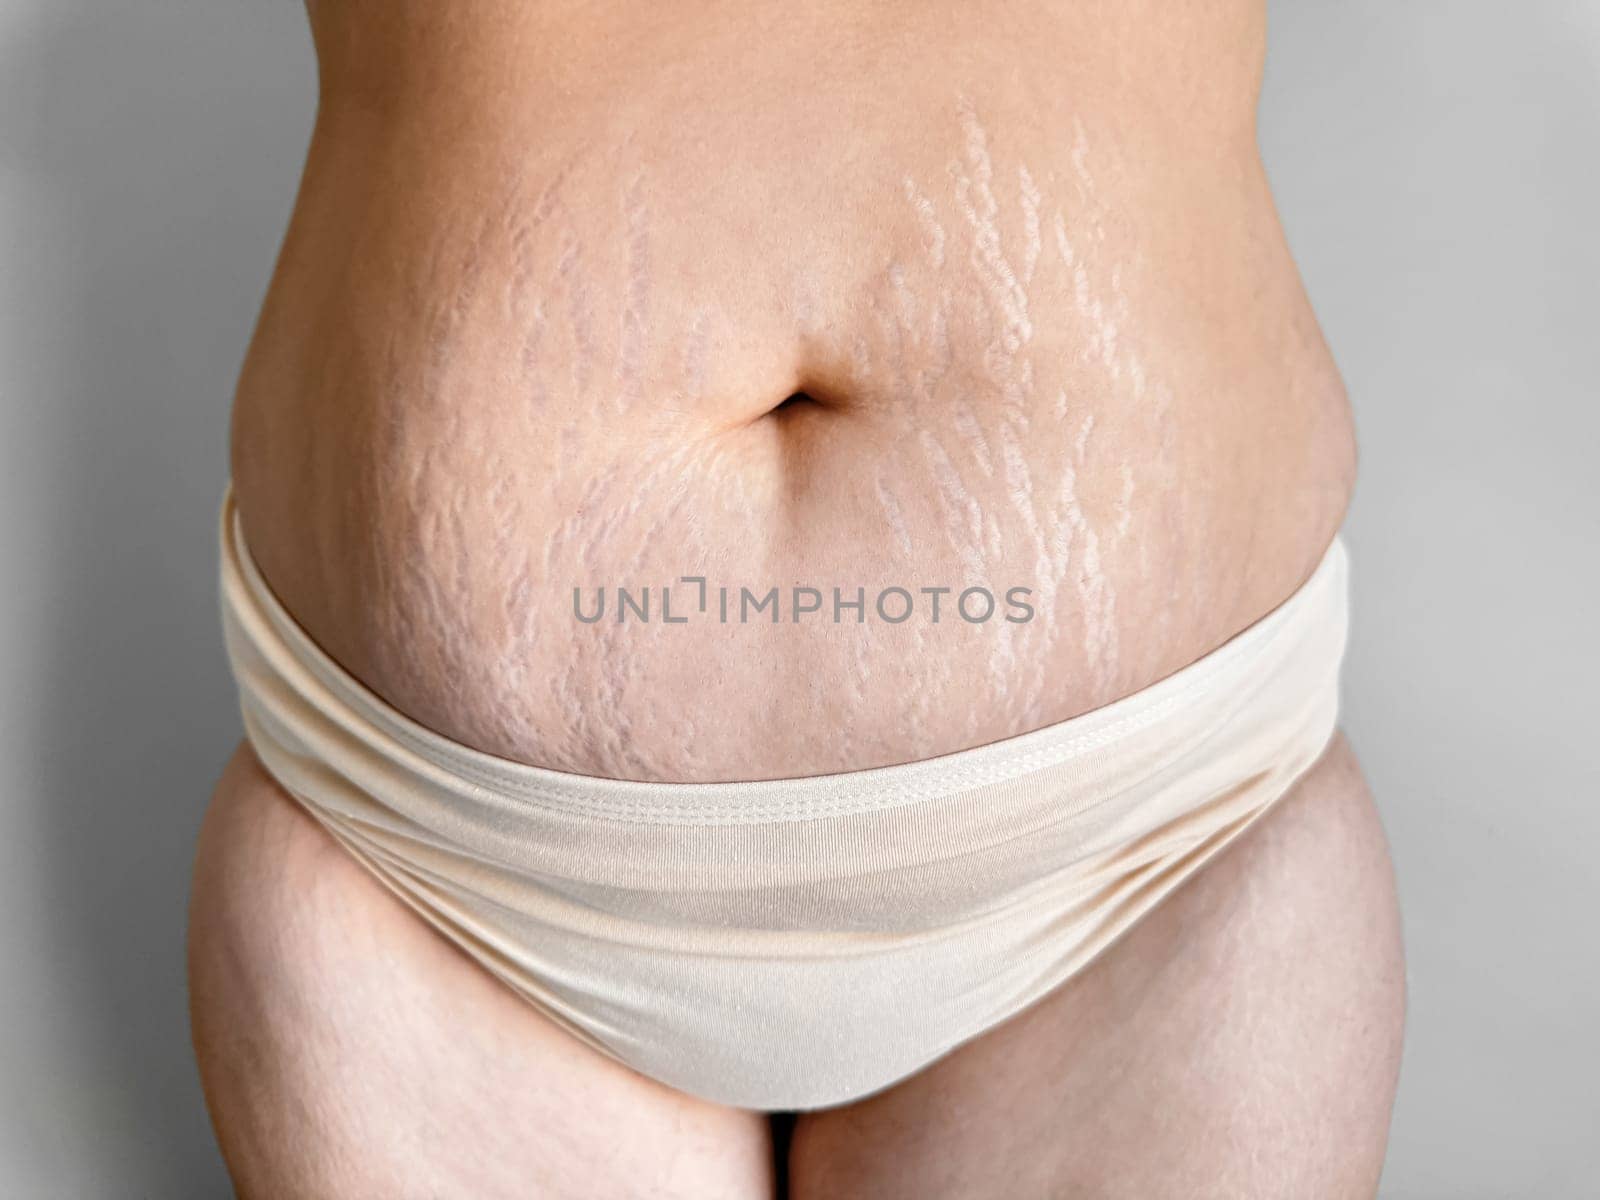 Womans midsection with stretch marks to celebrate real beauty, body positivity, and the natural changes after childbirth. The concept of self love and naturalness. High quality photo